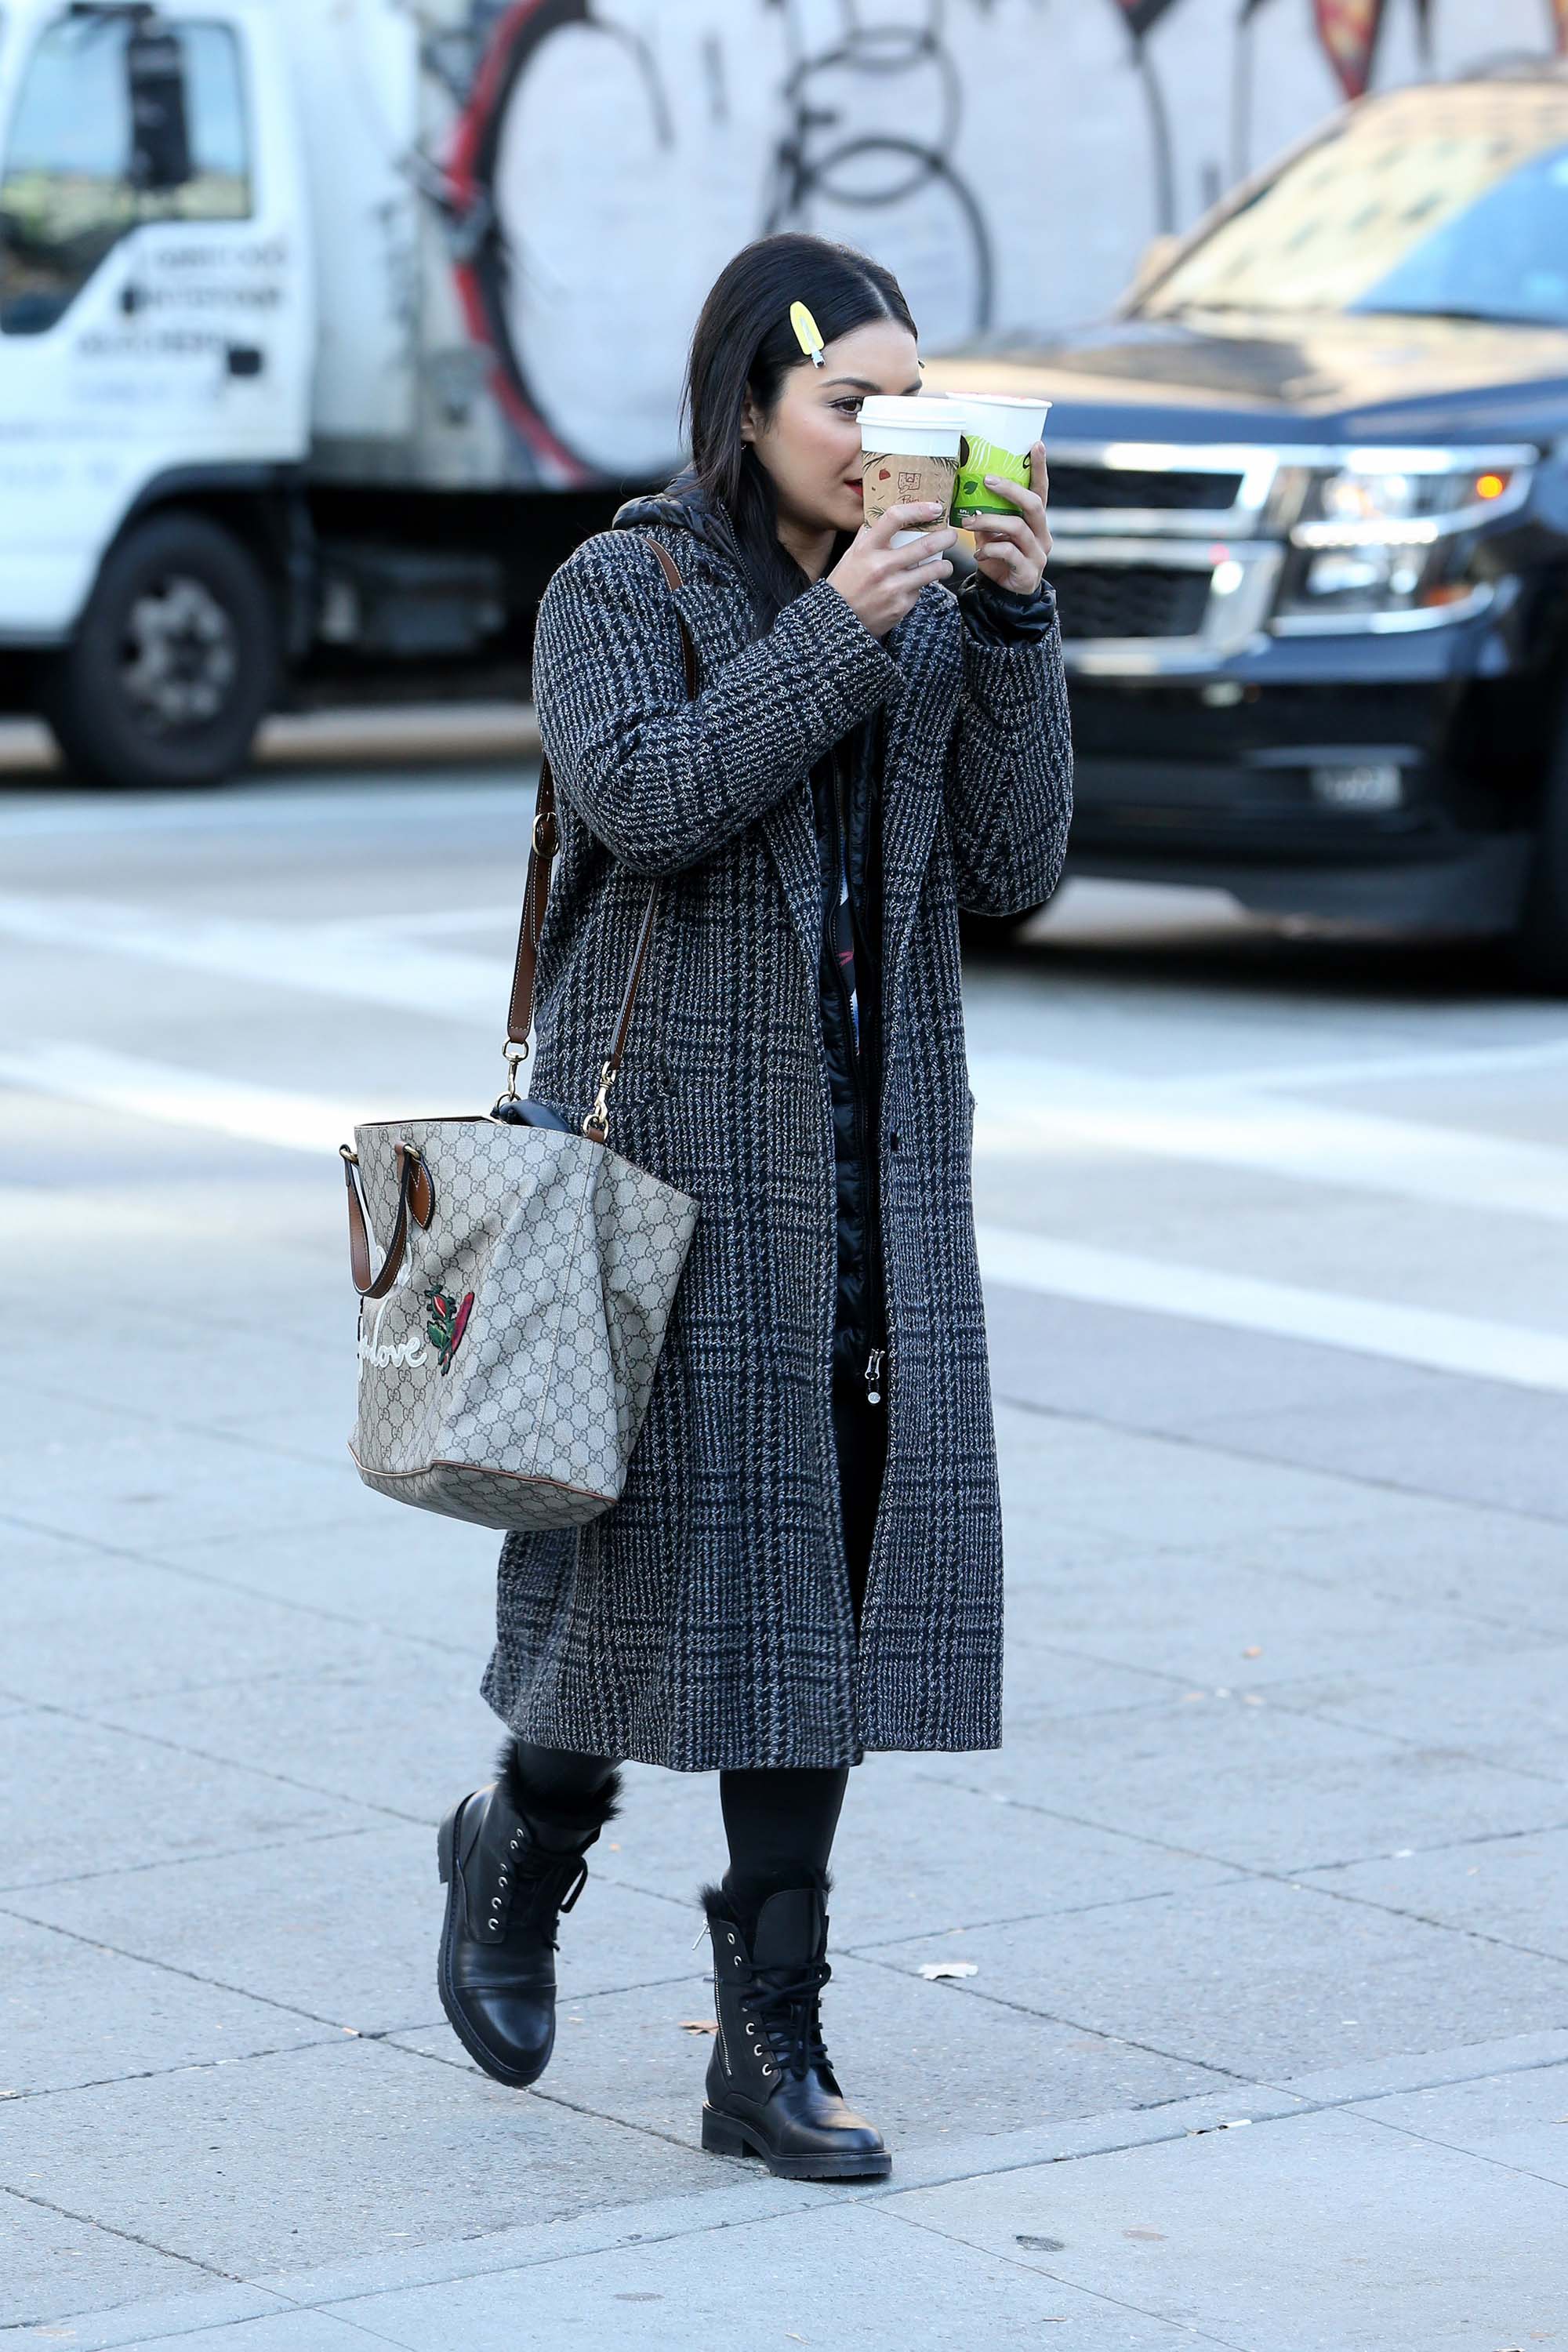 Vanessa Hudgens on the set of ‘Second Act’